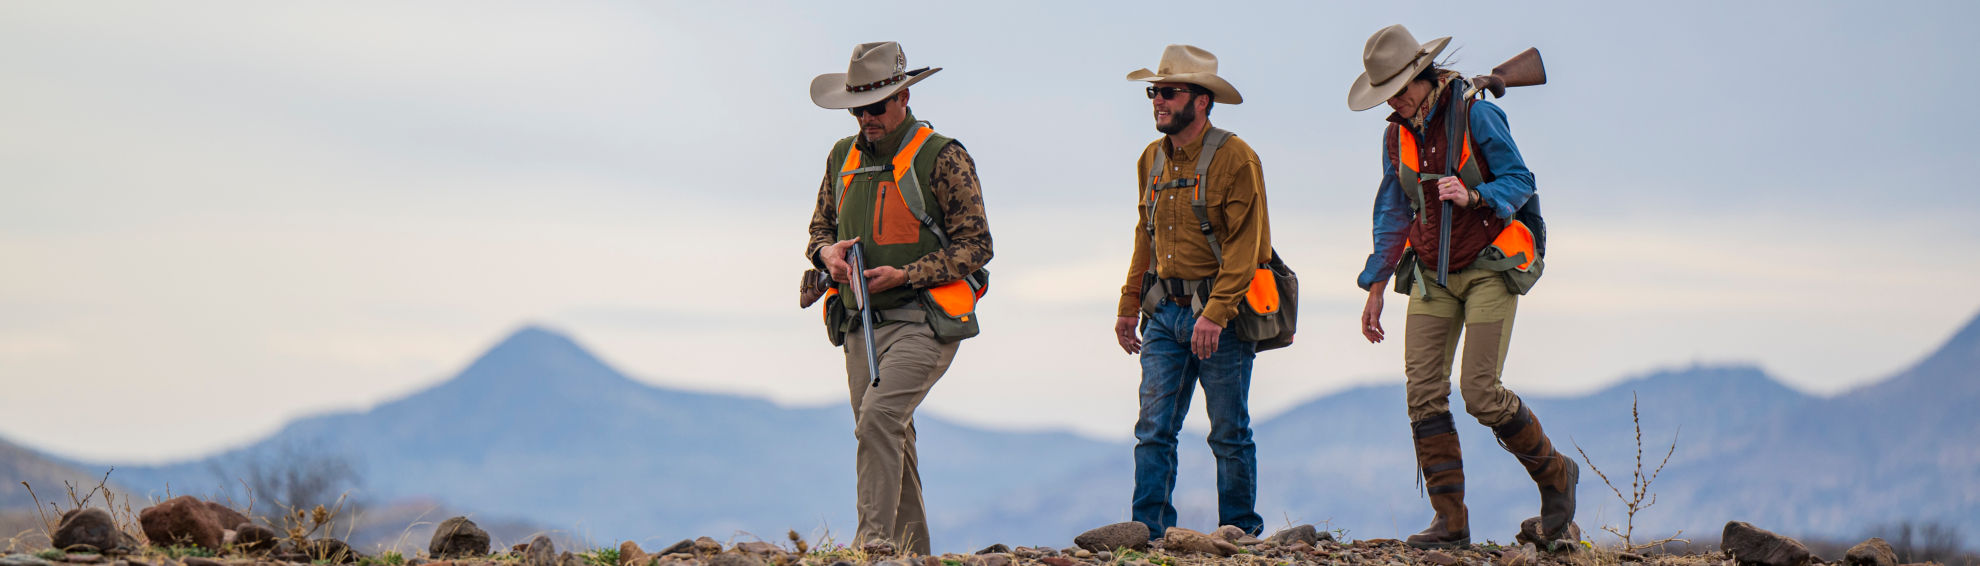 Three hunters wearing hunting gear walking in an open fi.eld with mountains in the background.